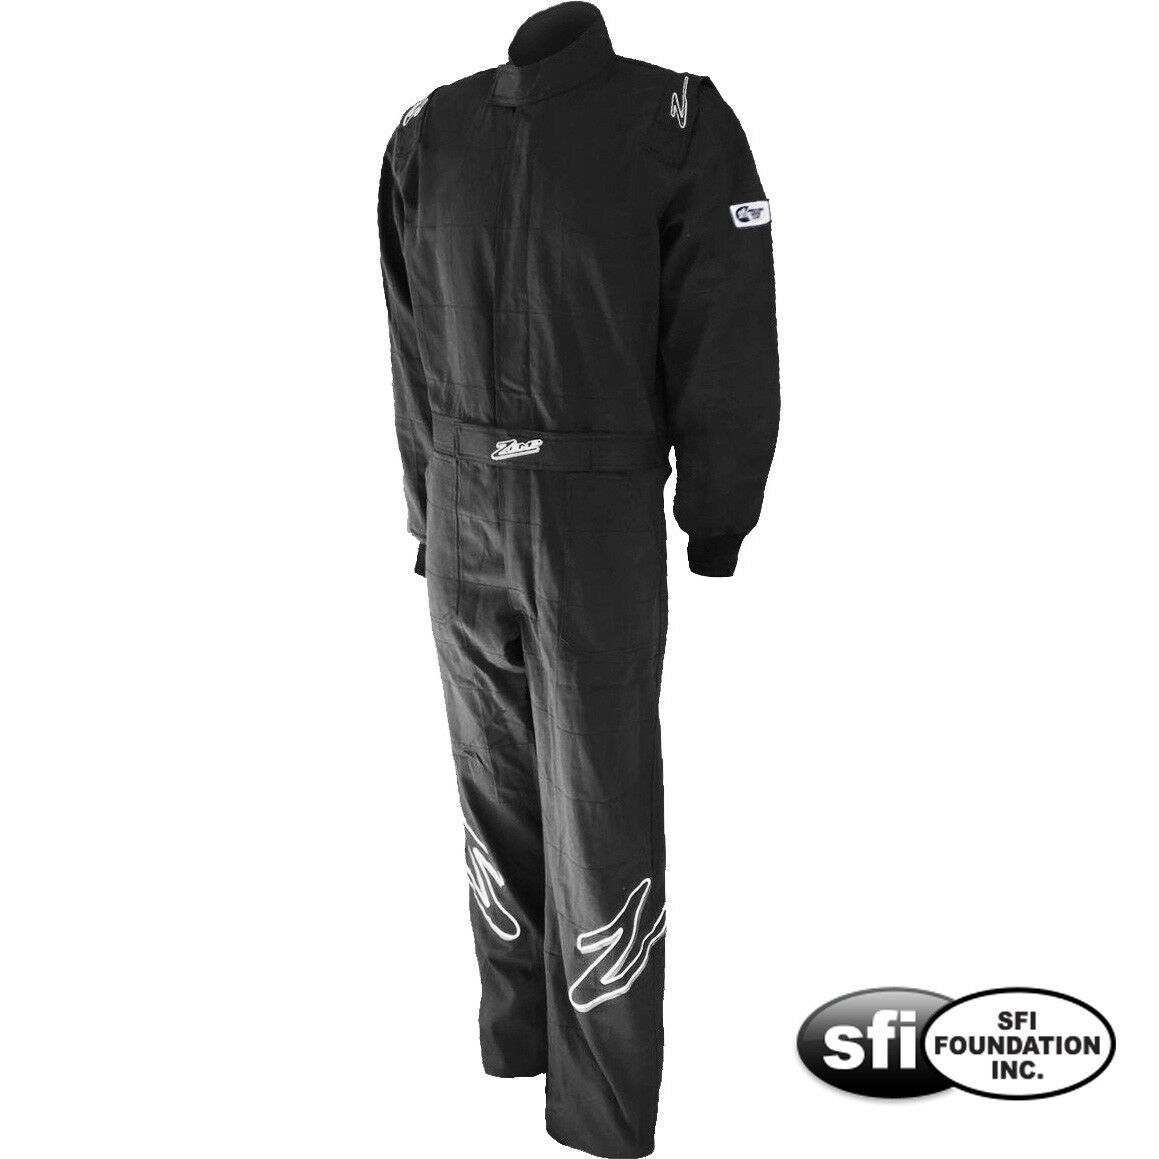 Zamp - Zr-10 Sfi-1 Auto Racing Suit - 1-piece Nomex Style Fire Sfi 3.2a/1 Rated